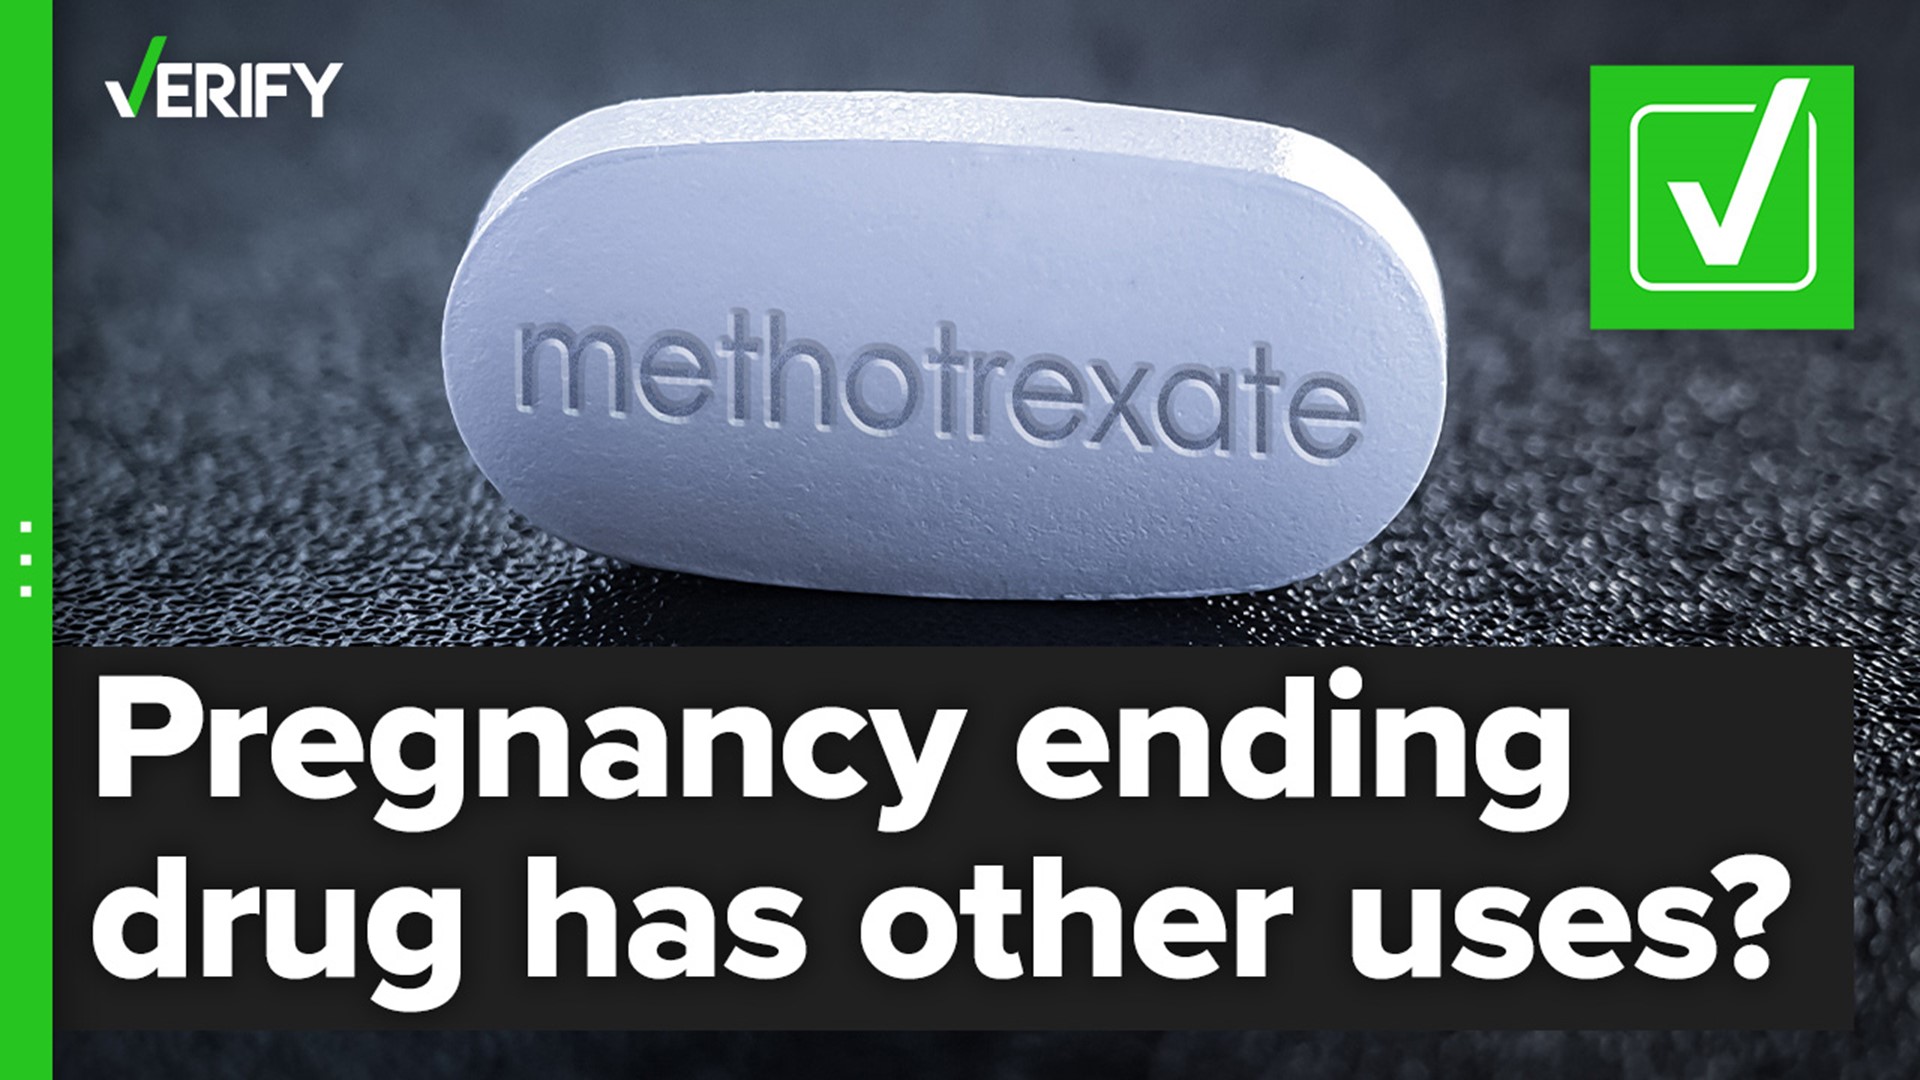 Medical organizations are reporting that some patients can’t access methotrexate in states with abortion bans. The drug is used to treat serious health conditions.